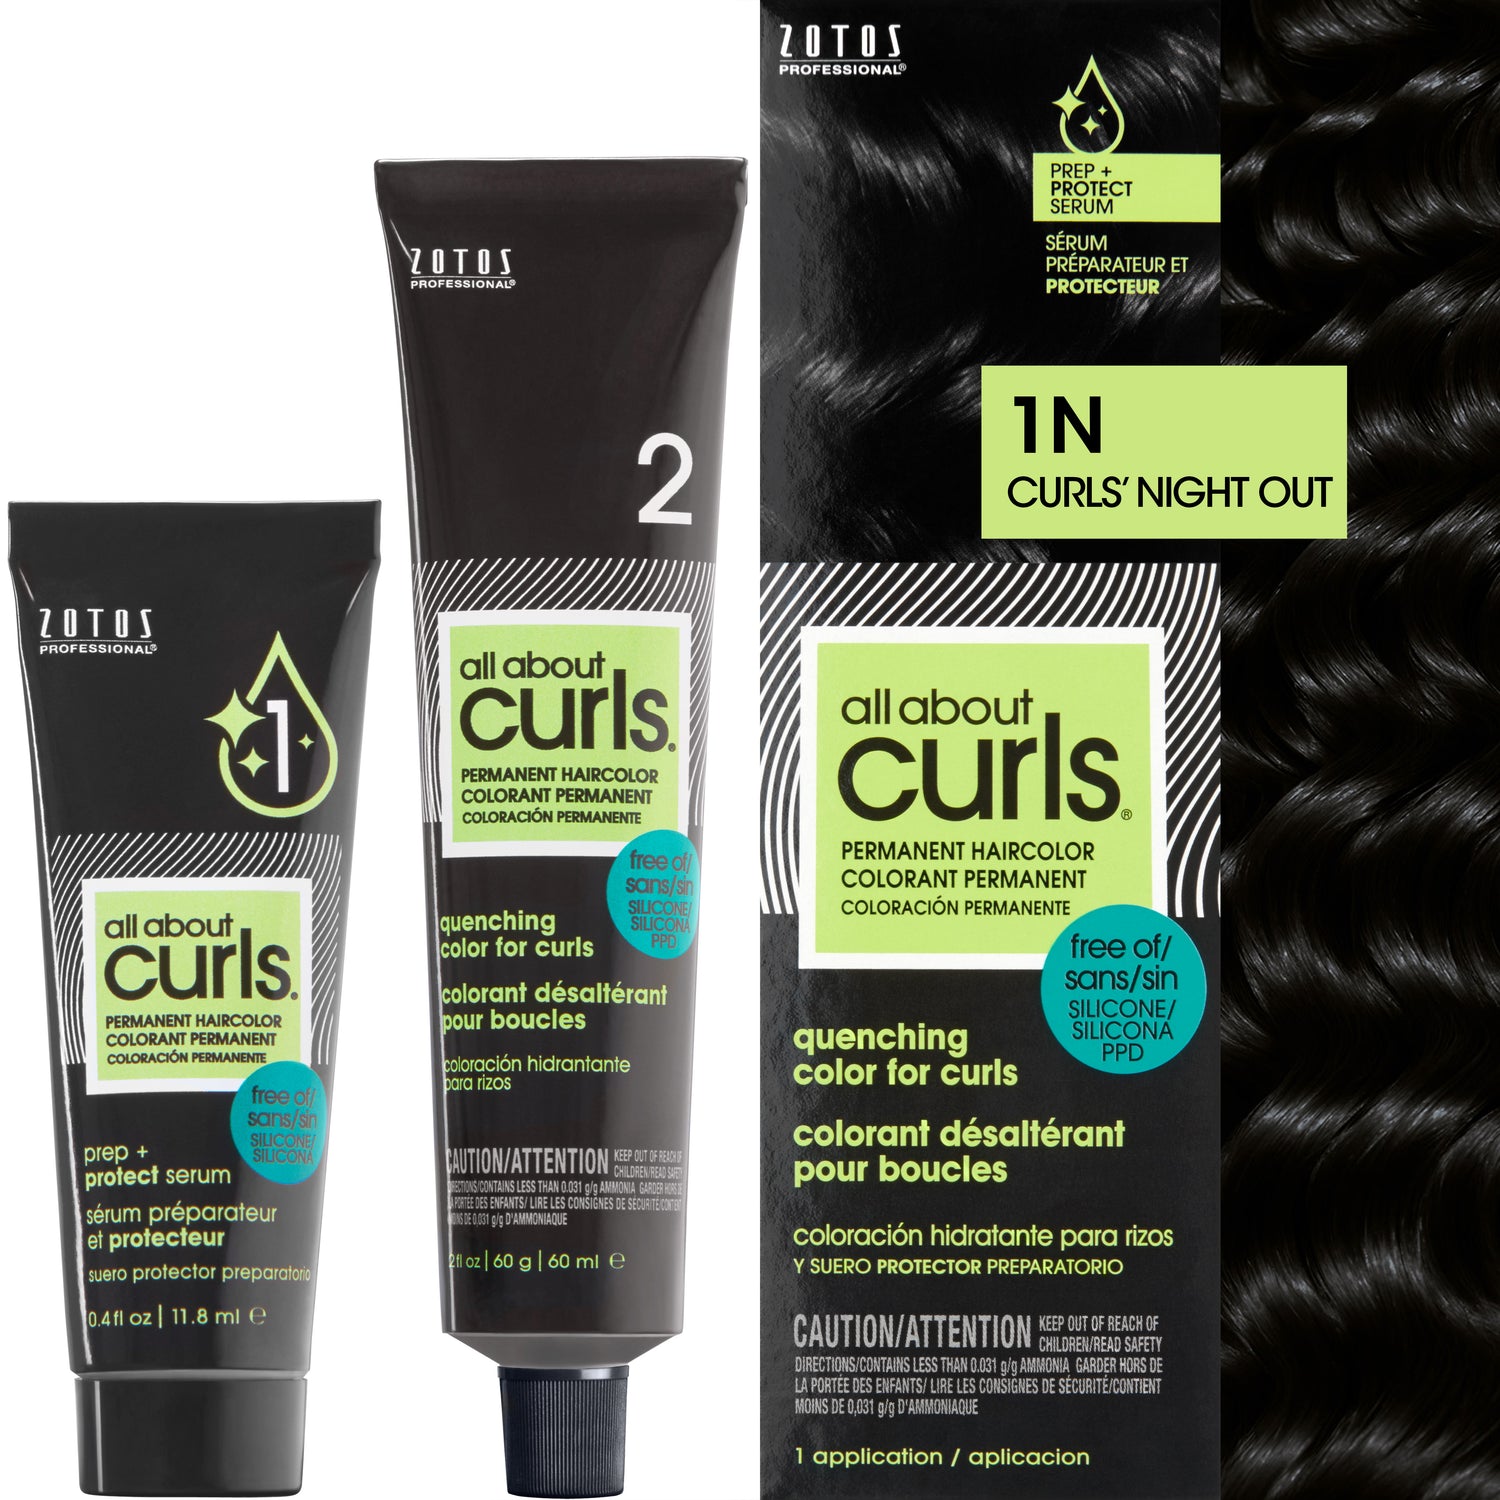 Two bottles and packaging for All About Curls Permanent Color in shade 1N Curls' Night Out.